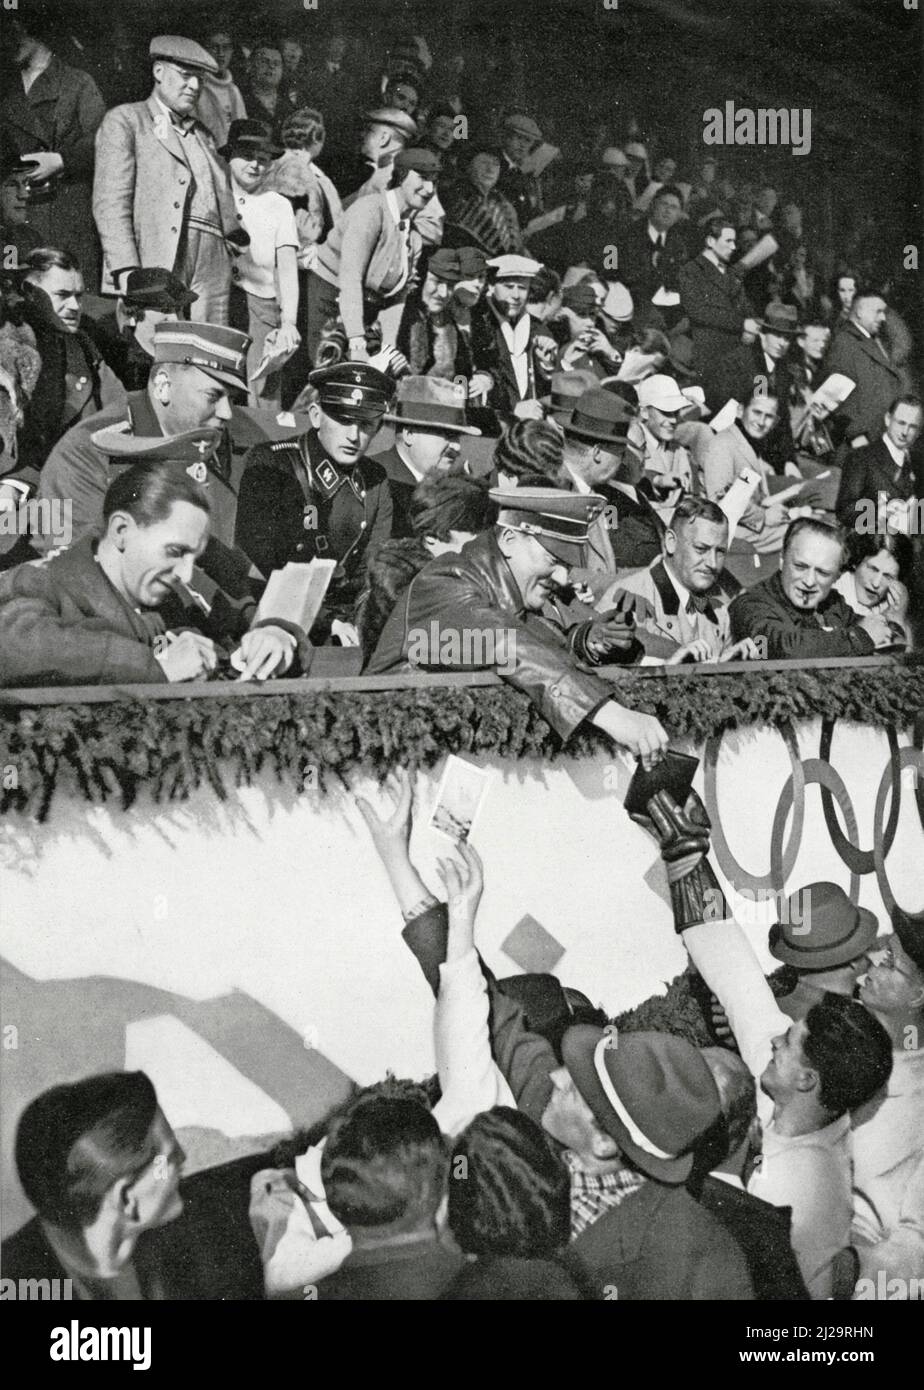 Reich Chancellor Adolf Hitler signs autographs for Canadian athletes in the Artificial Ice Stadium, with Reich Propaganda Minister Joseph Goebbels to Stock Photo